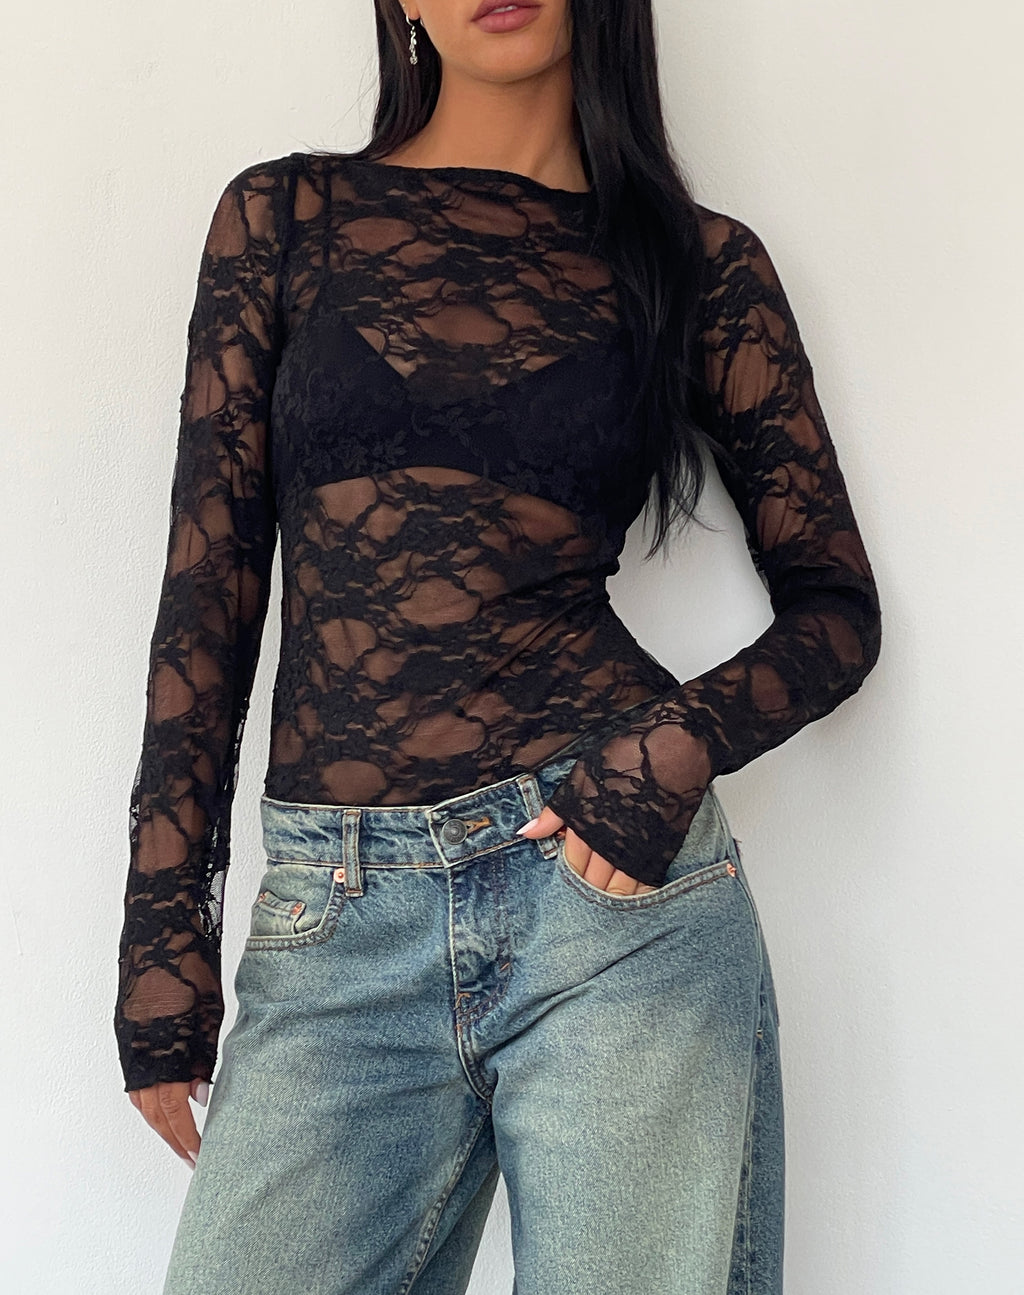 Grizelda Backless Long Sleeve Top in Black Abstract Lace